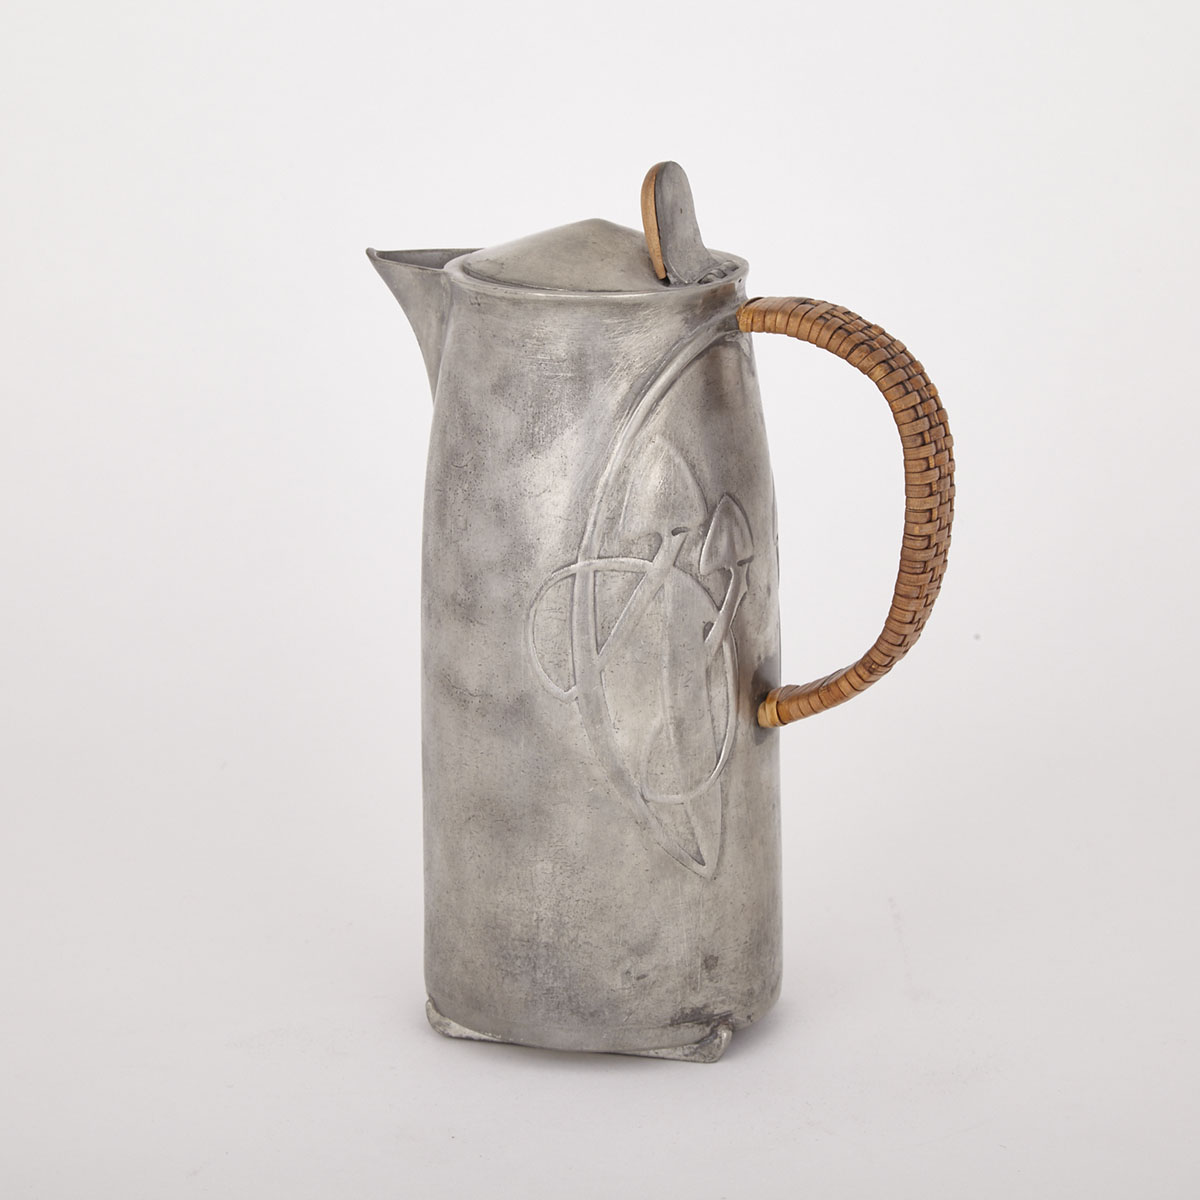 Archibald Knox ‘Tudric’ Pewter Hot Water Jug, for Liberty & Co., early 20th century